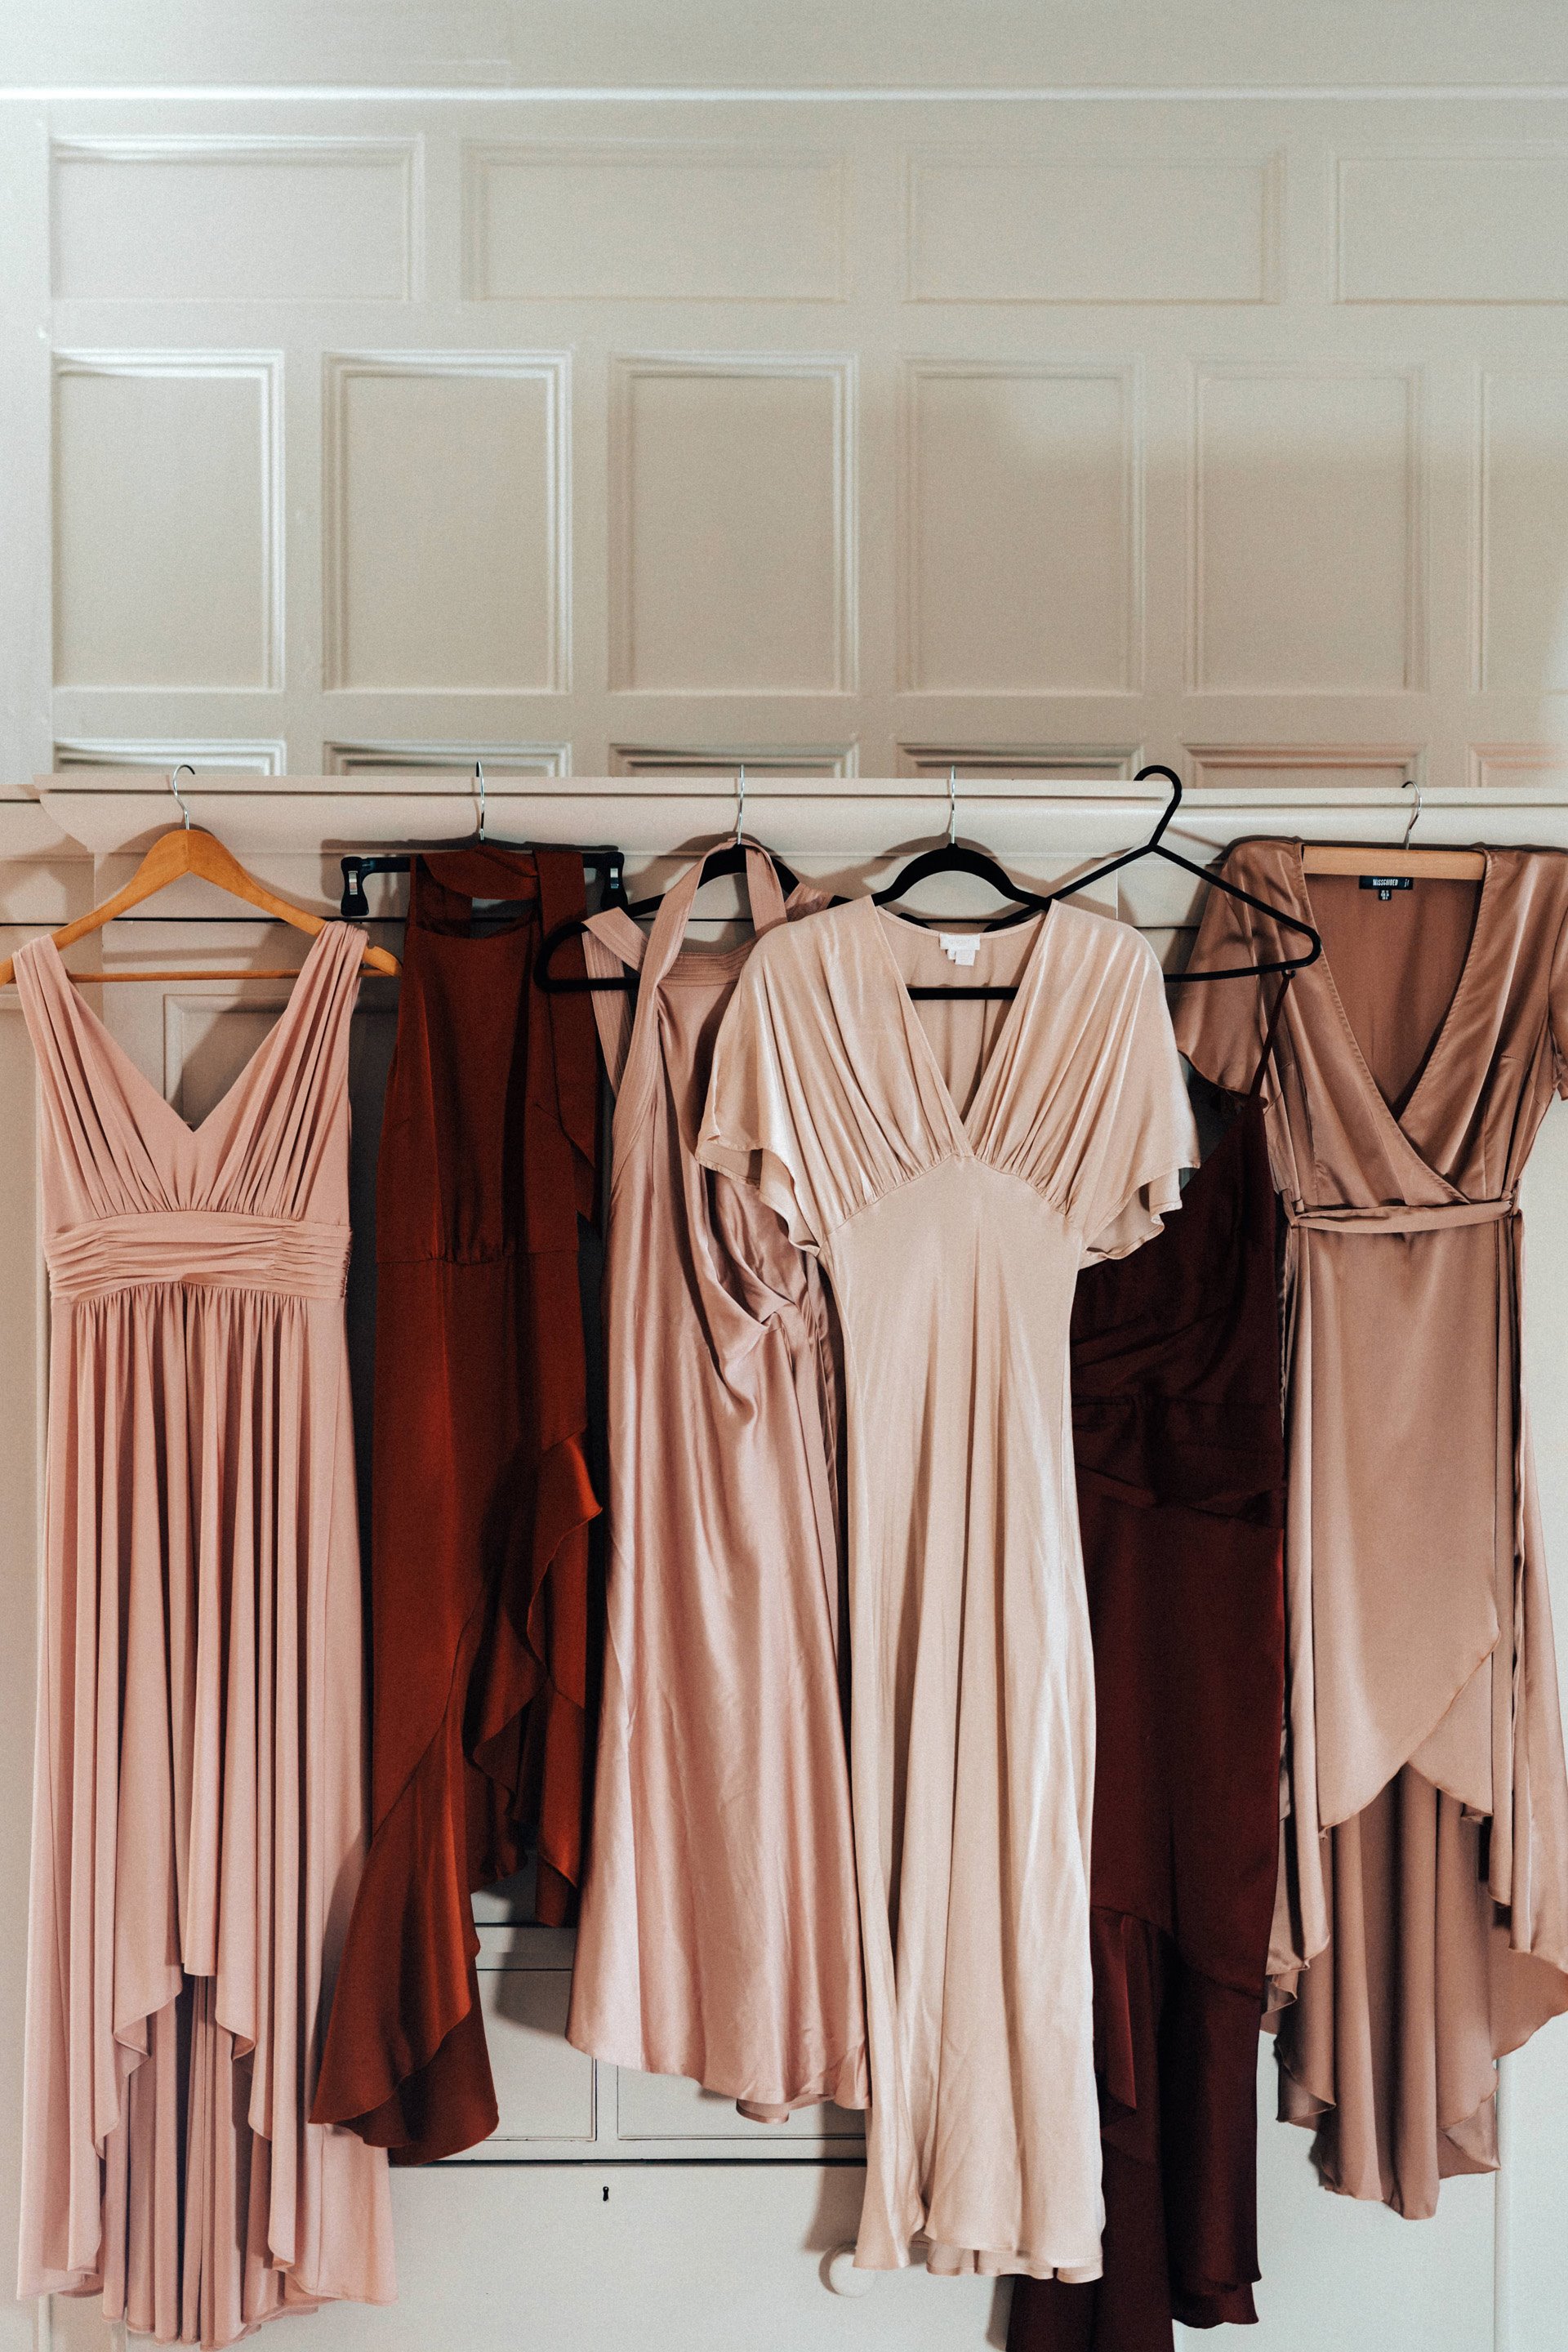 Blush pink wedding outfits for a September wedding with a golden theme